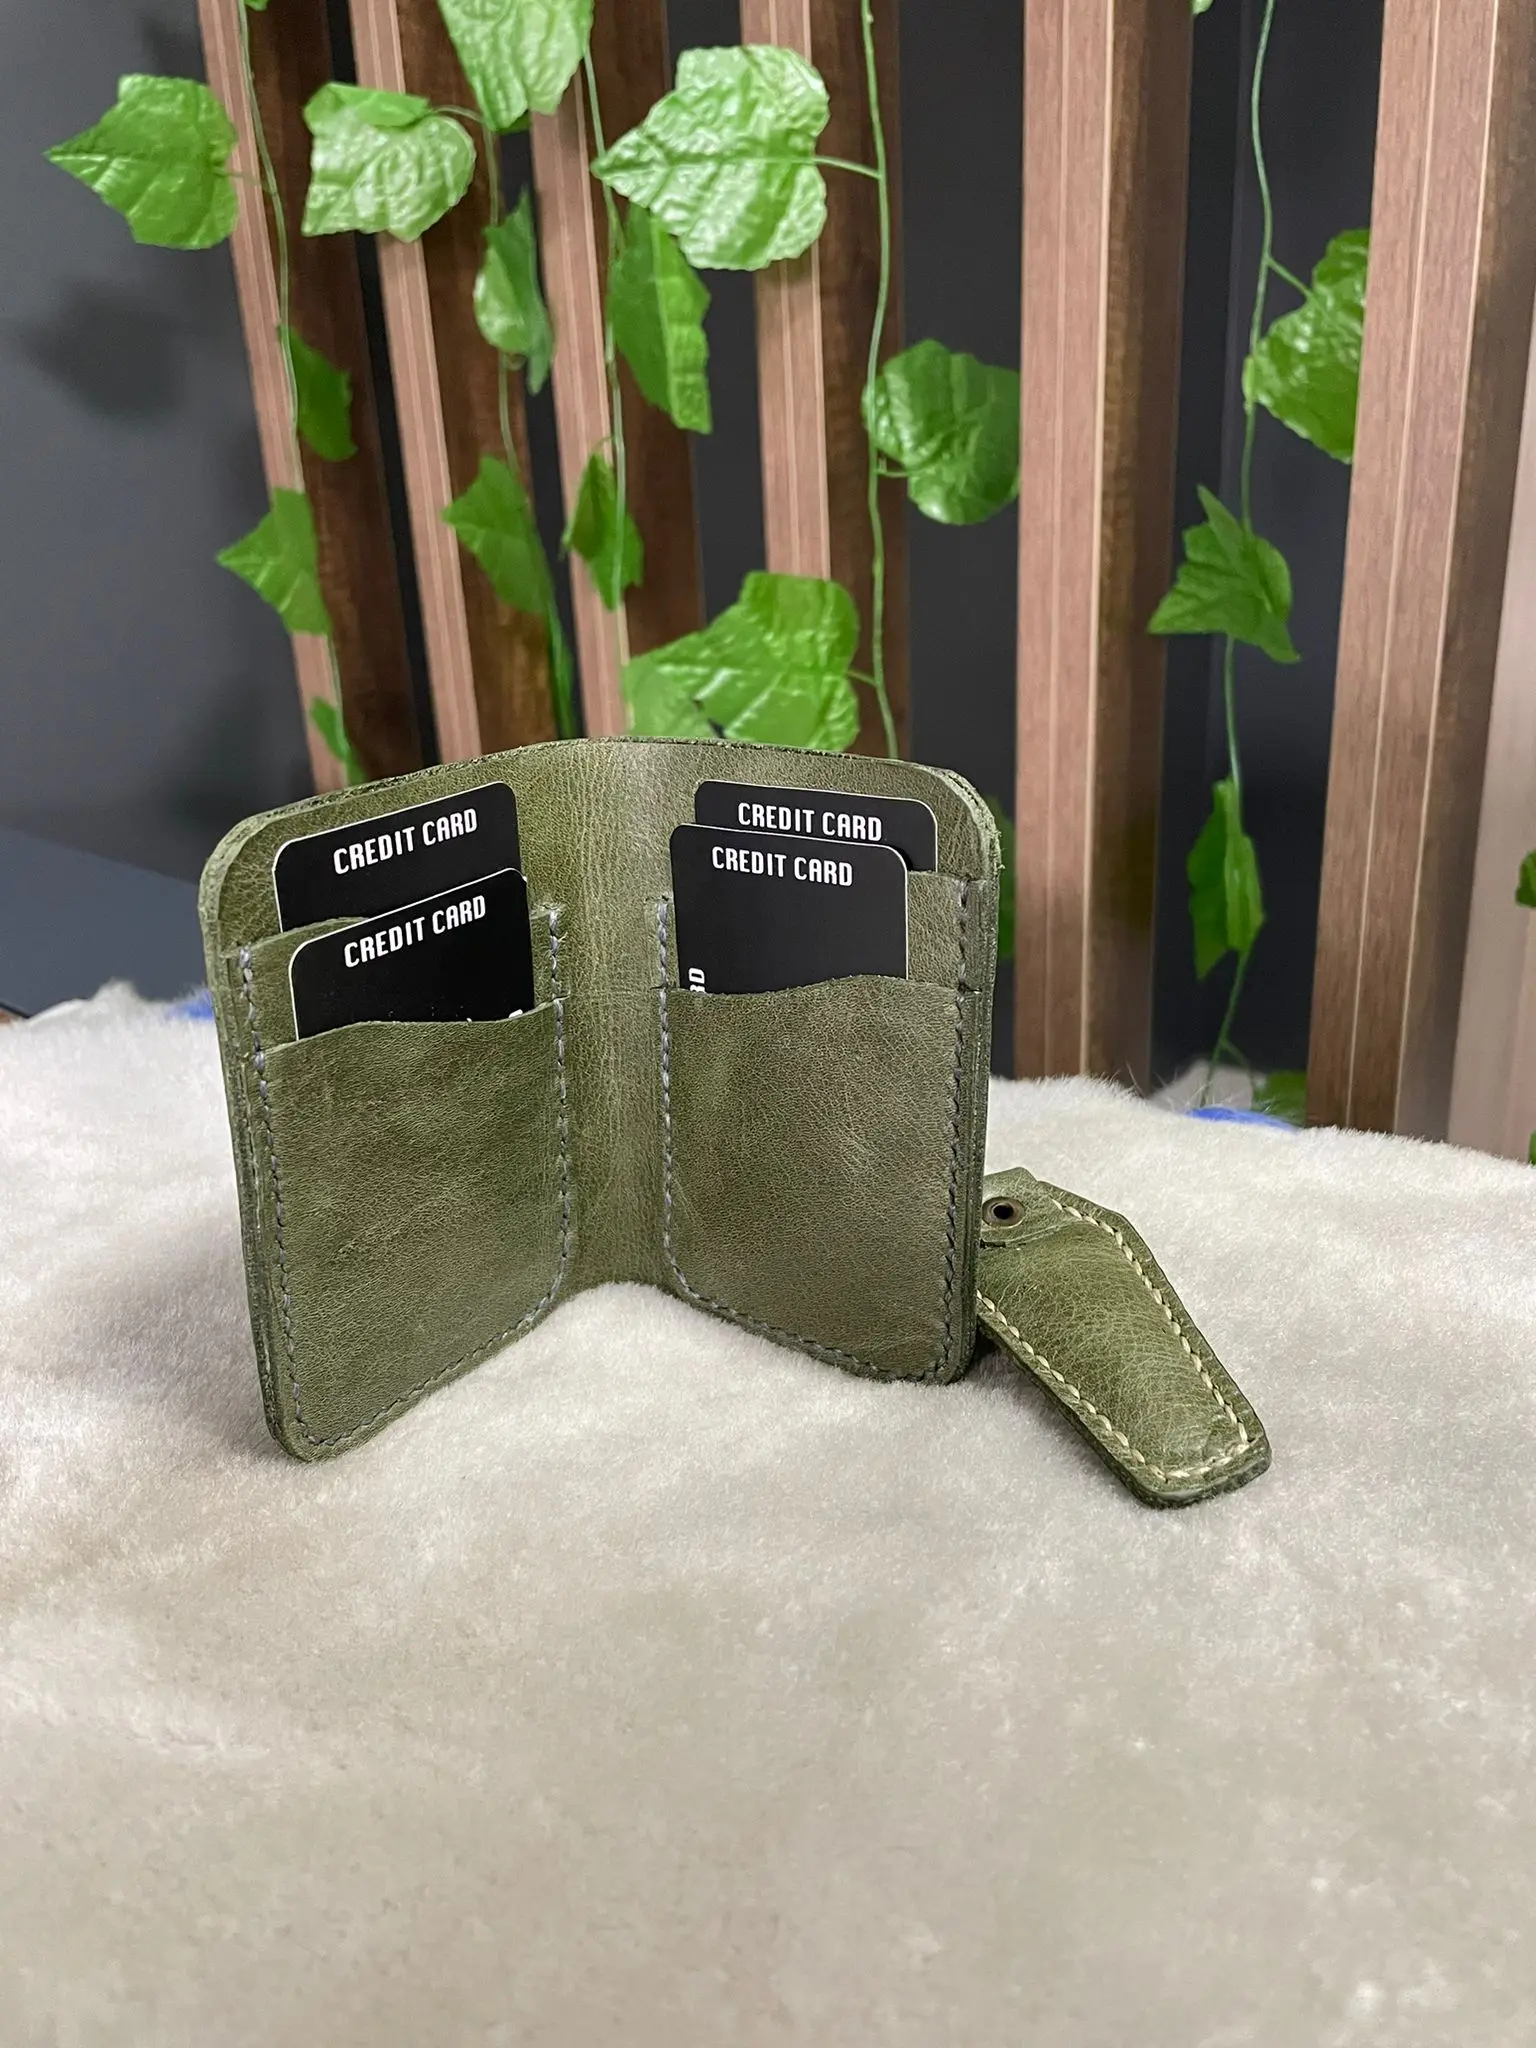 

Men's Wallet Foldable Small Money Purses Leather Wallet Luxury Billfold Hipster Cowhide Credit Card/ID Holders